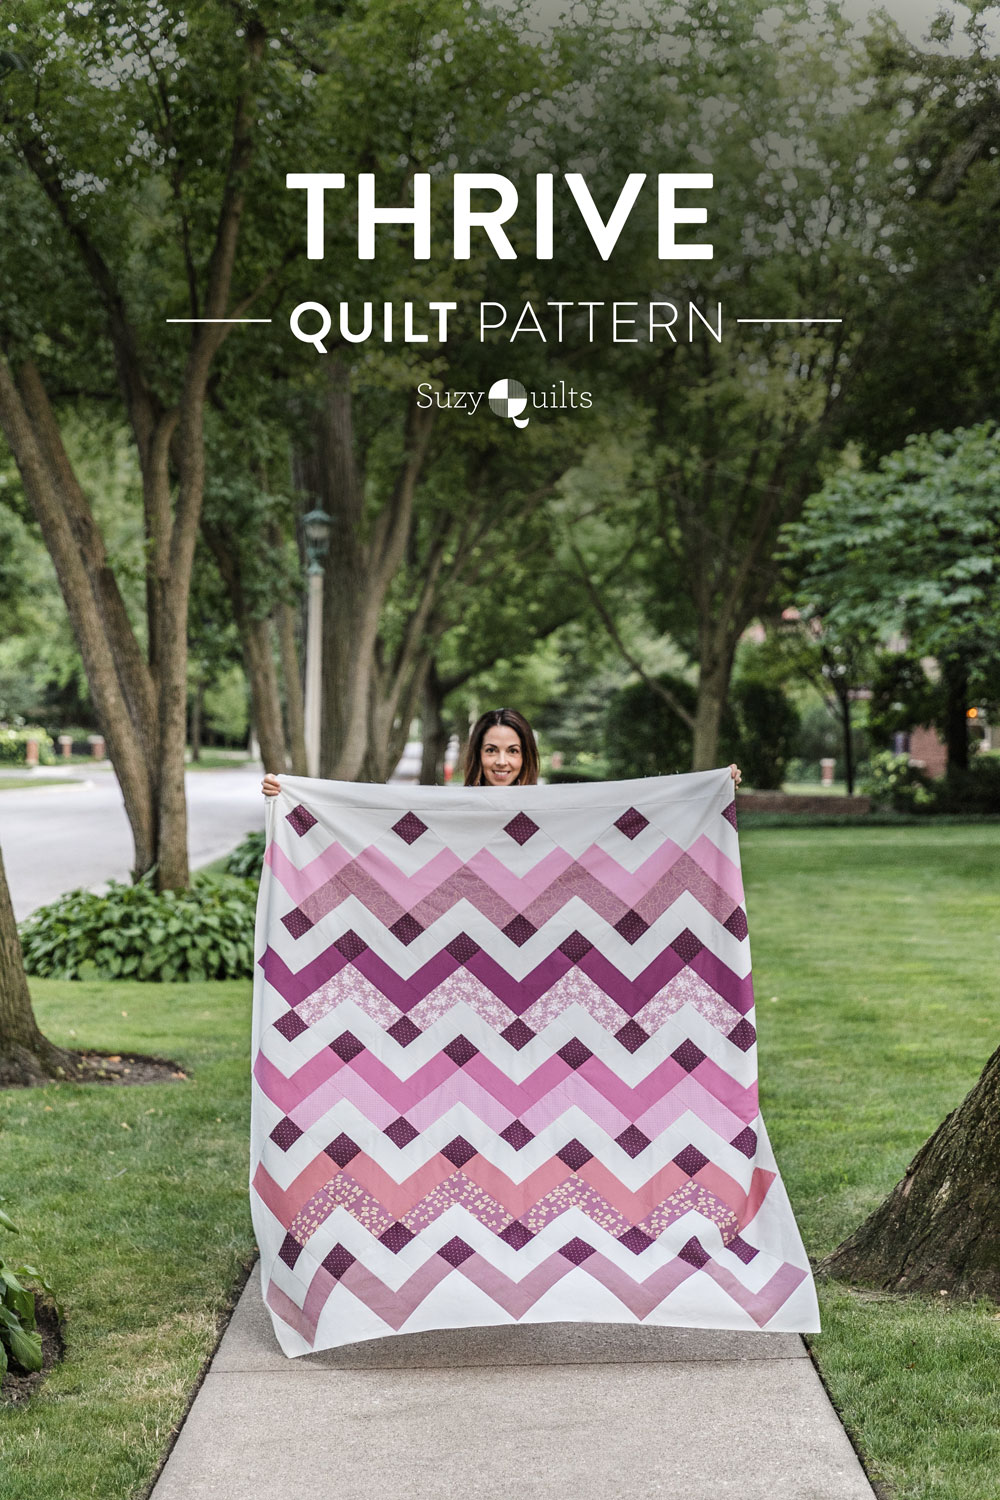 In the final week of the Thrive sew along we sew the finished quilt top. Included is a video tutorial on how to trim and square up your corners! suzyquilts.com #modernquilt #quiltpattern